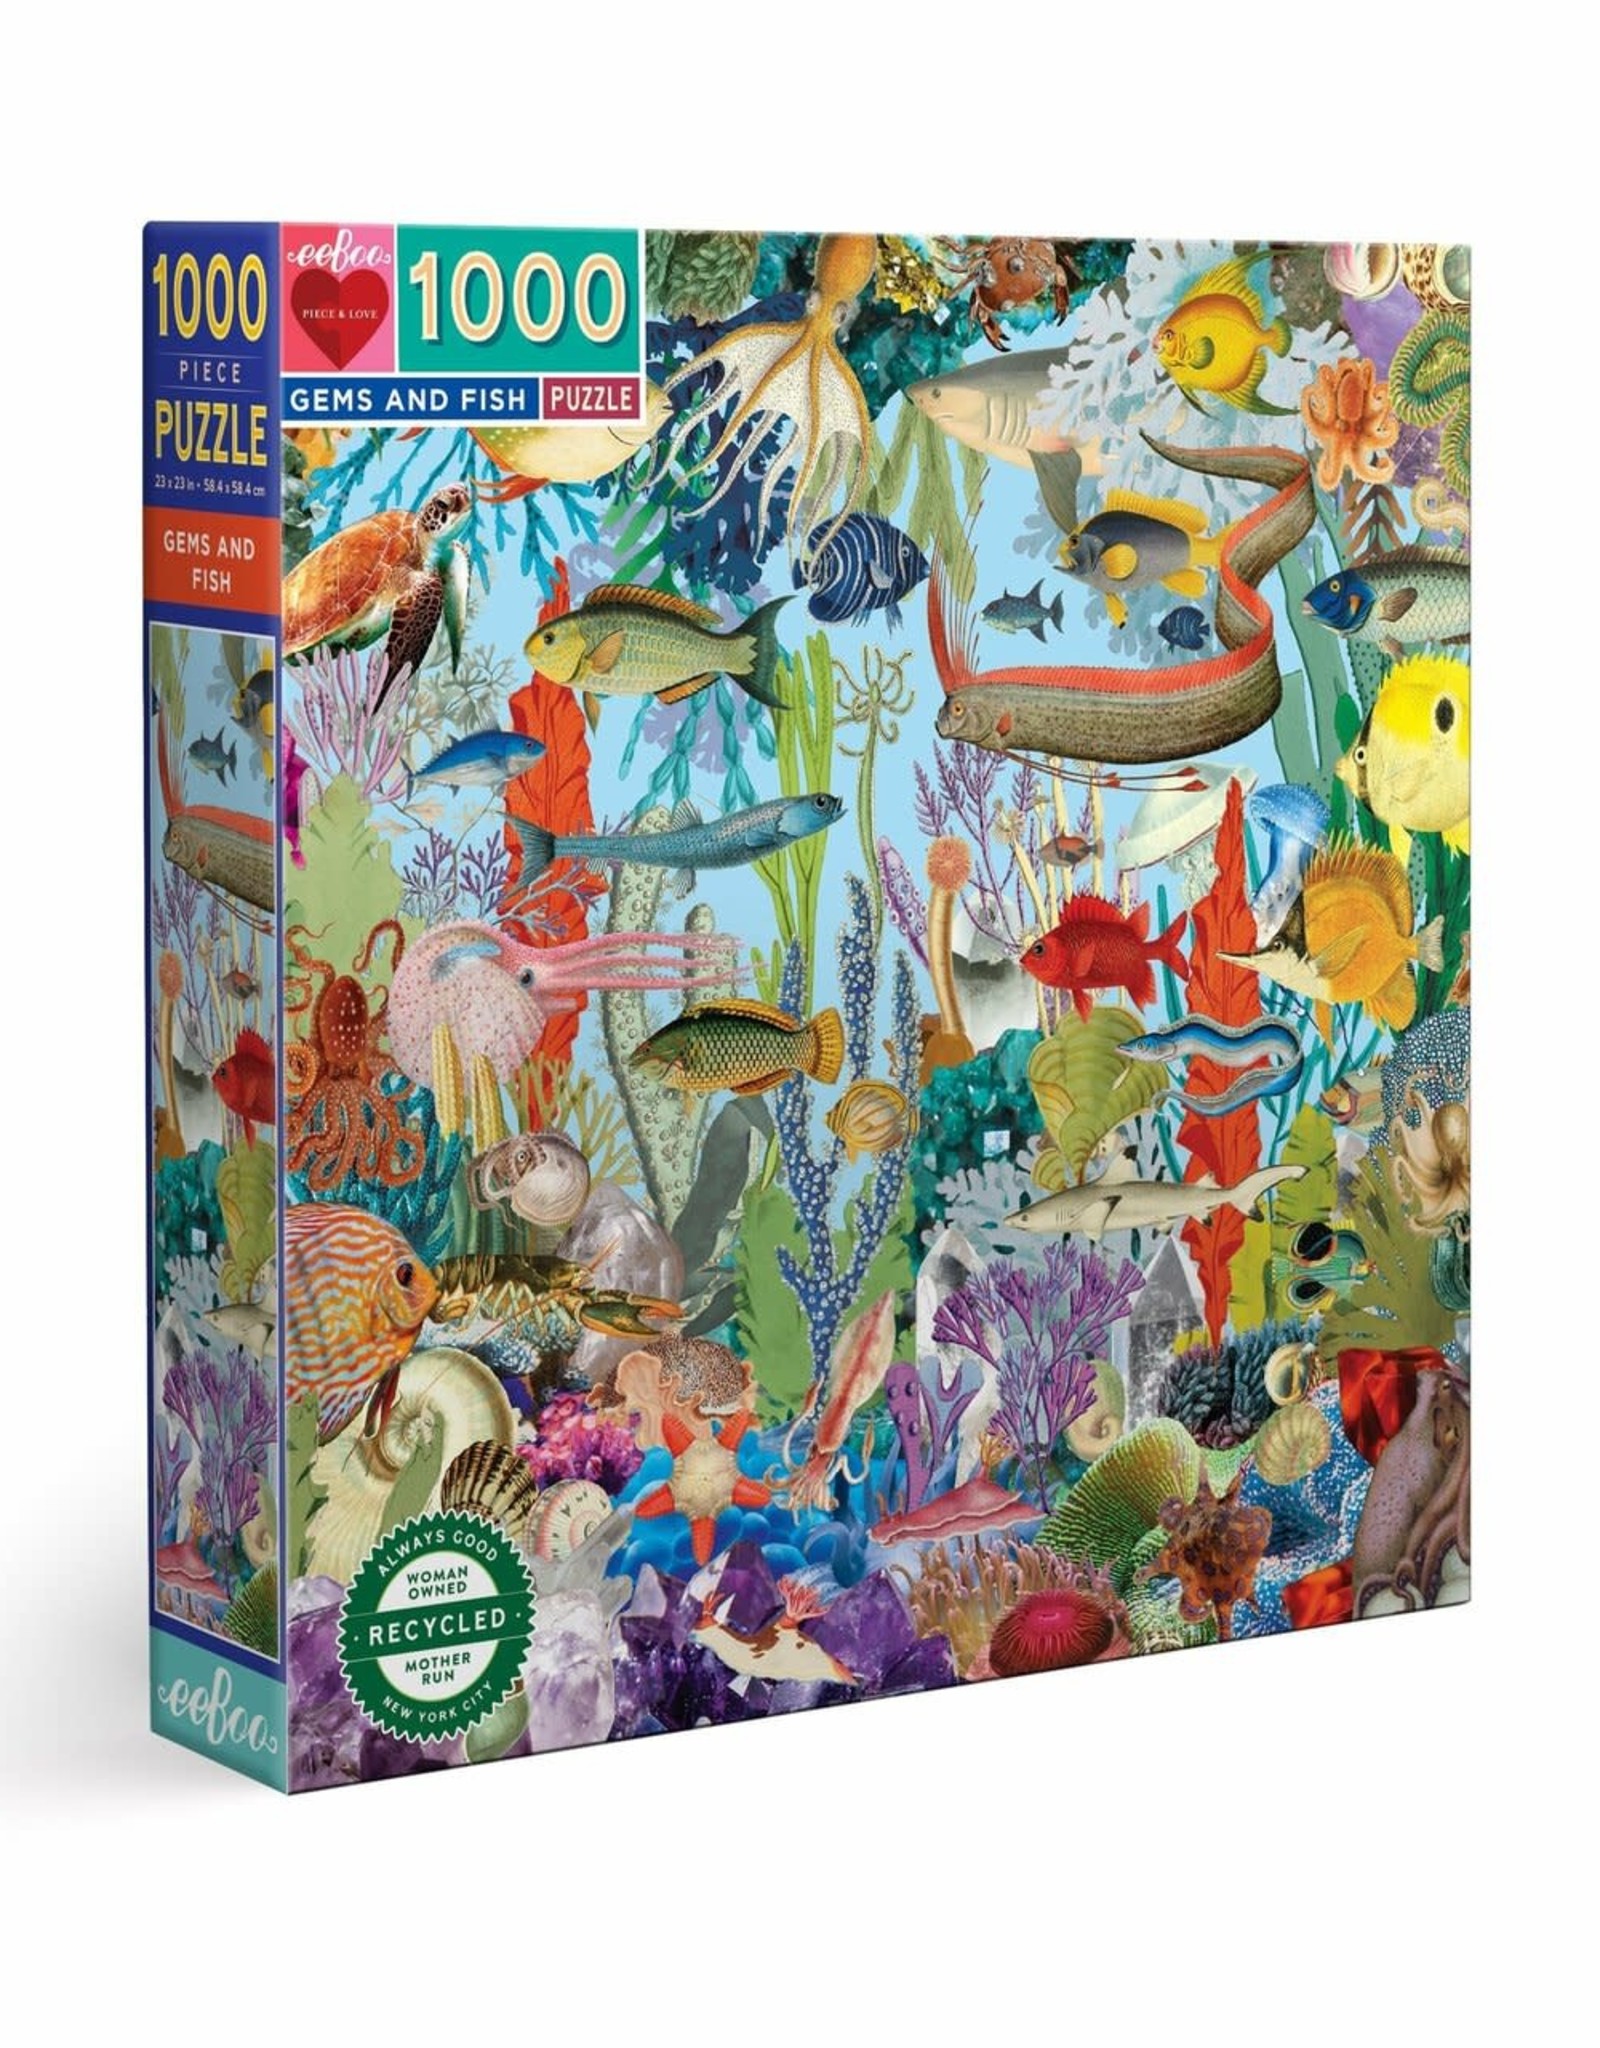 eeBoo GEMS AND FISH 1000 PC SQ PUZZLE